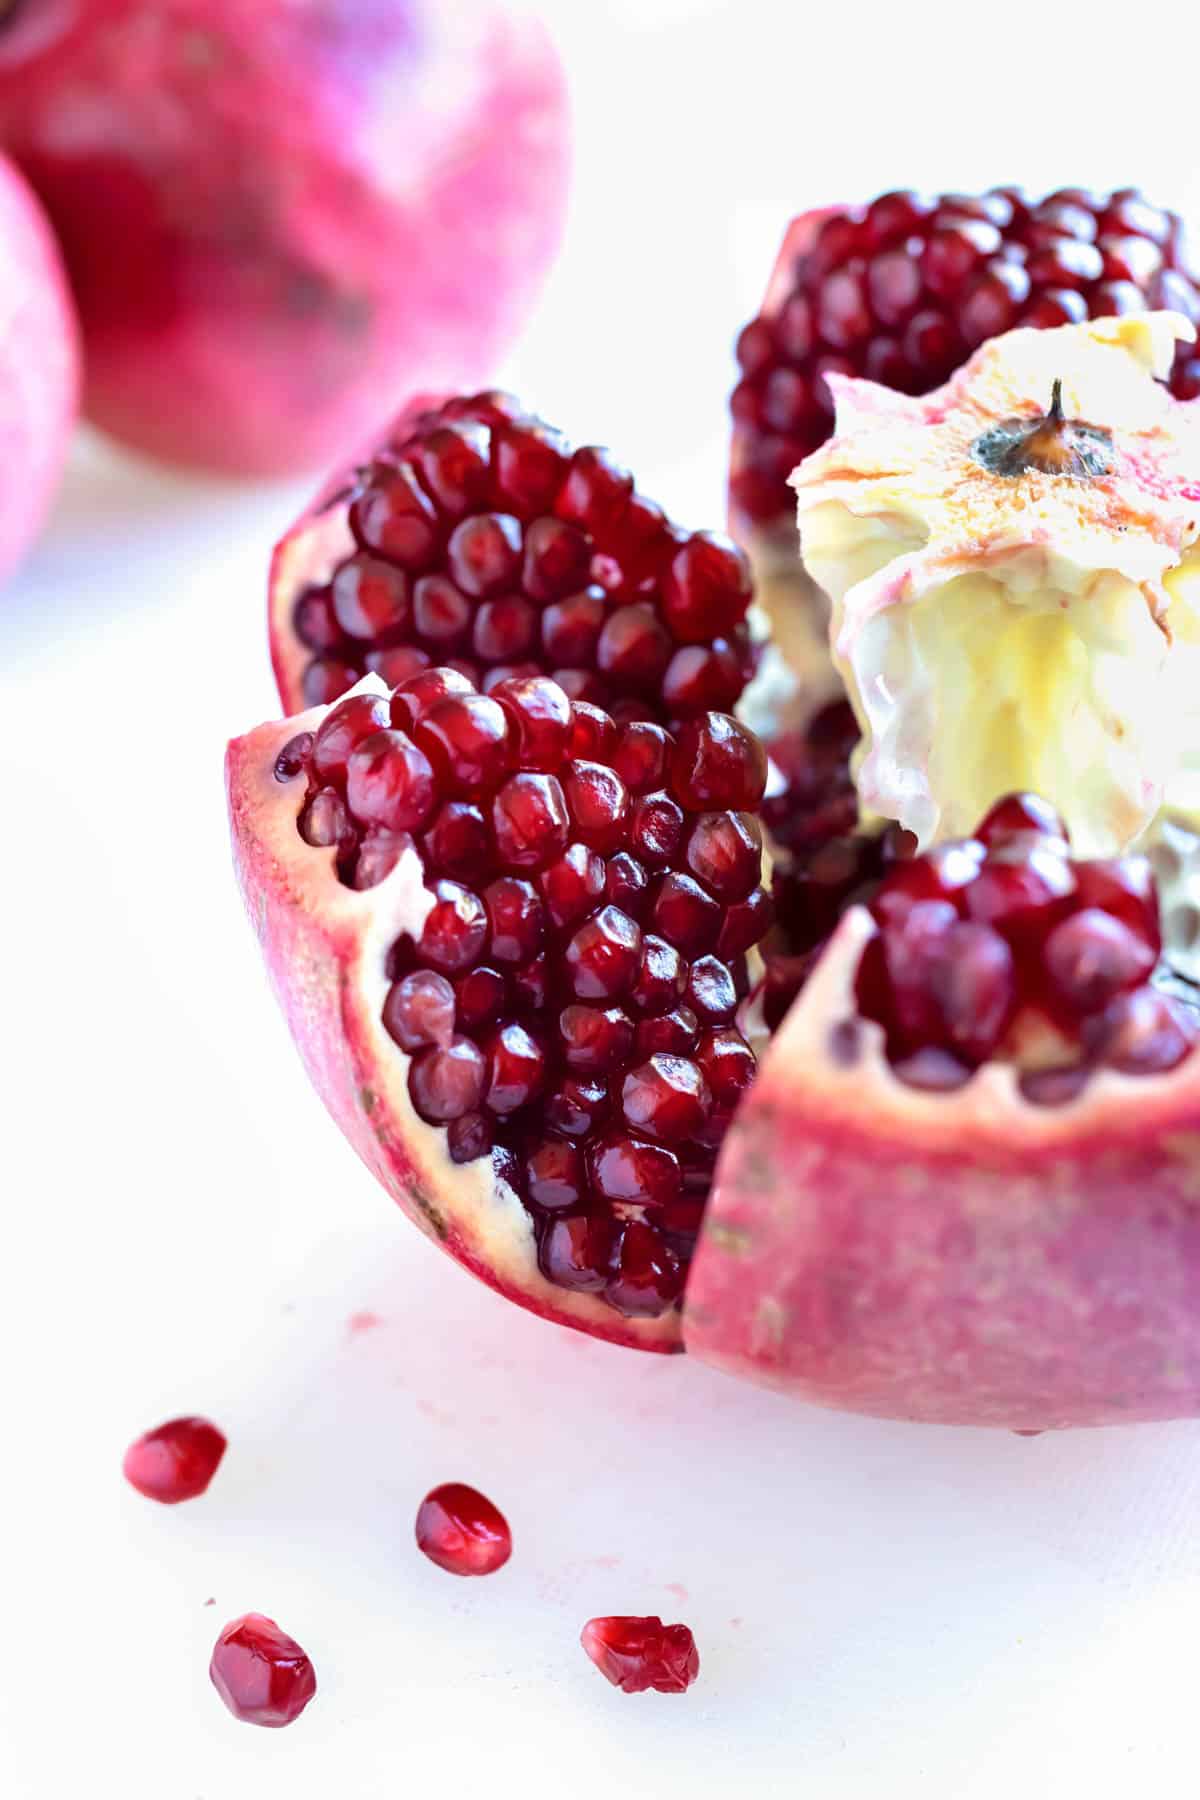 A whole pomegranate is cut open and the seeds exposed.